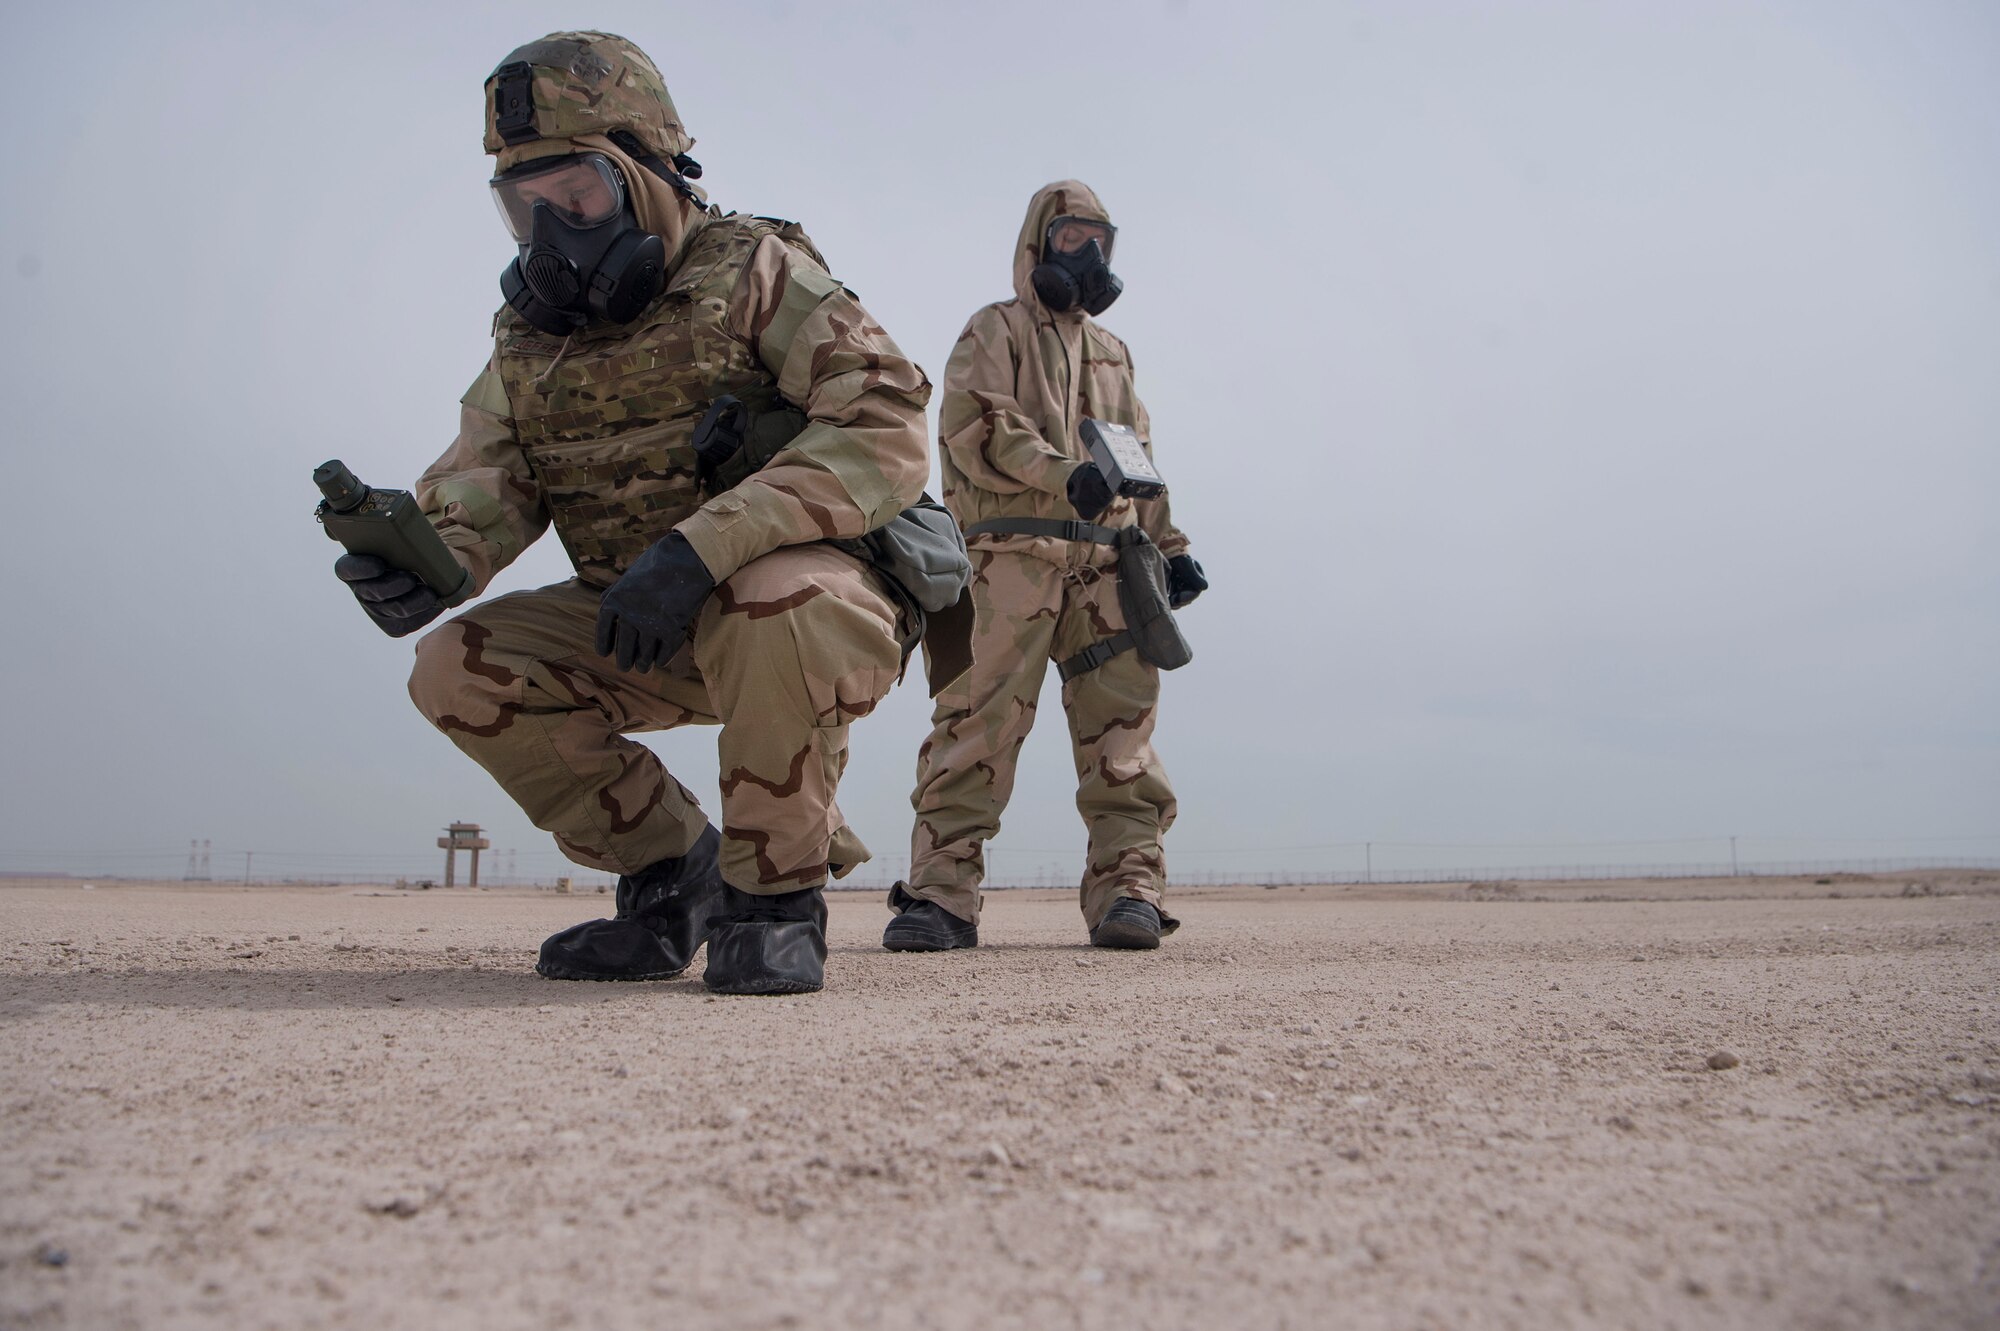 Tech. Sgt. Steven Jefferies (left), and Staff Sgt. Rikki Sechrist (right), both of the 379th Expeditionary Civil Engineer Squadron (ECES) emergency management office, conduct a ground survey during a joint decontamination exercise Feb. 22, 2019, at Al Udeid Air Base, Qatar. U.S. Air Force and Army participants from the 379th ECES and the 1st Battalion, 43rd Air Defense Artillery regiment, 11th ADA Brigade, shared Chemical, Biological, Radiological, Nuclear, and high yield explosives (CBRNE) best practices, and tested their response proficiency during the training. The event was the conclusion of a four phase training curriculum. (U.S. Air Force photo by Tech. Sgt. Christopher Hubenthal)